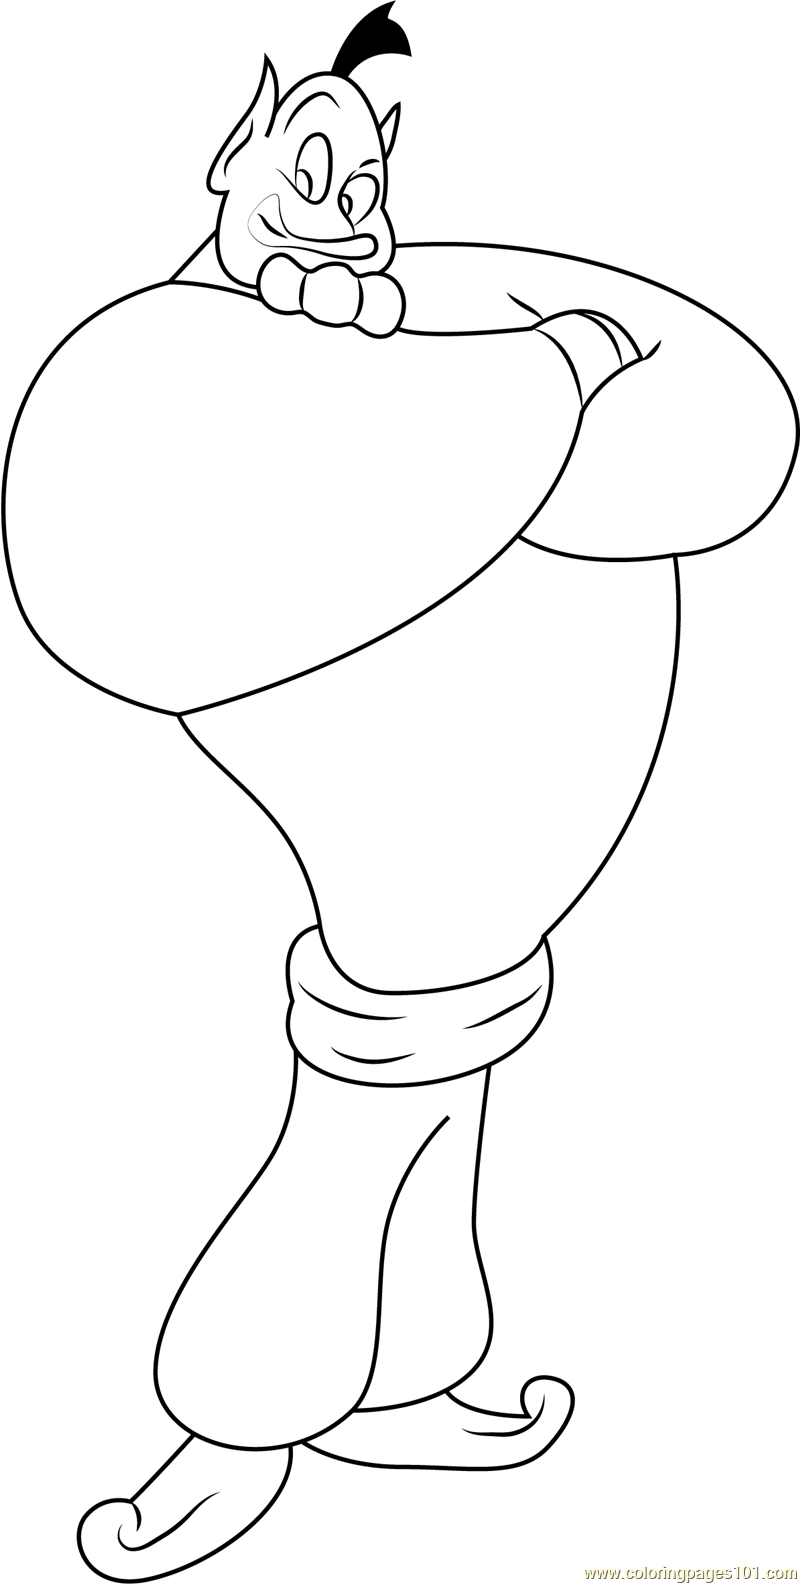 Aladdin Genie Coloring Page Free Aladdin Coloring Pages